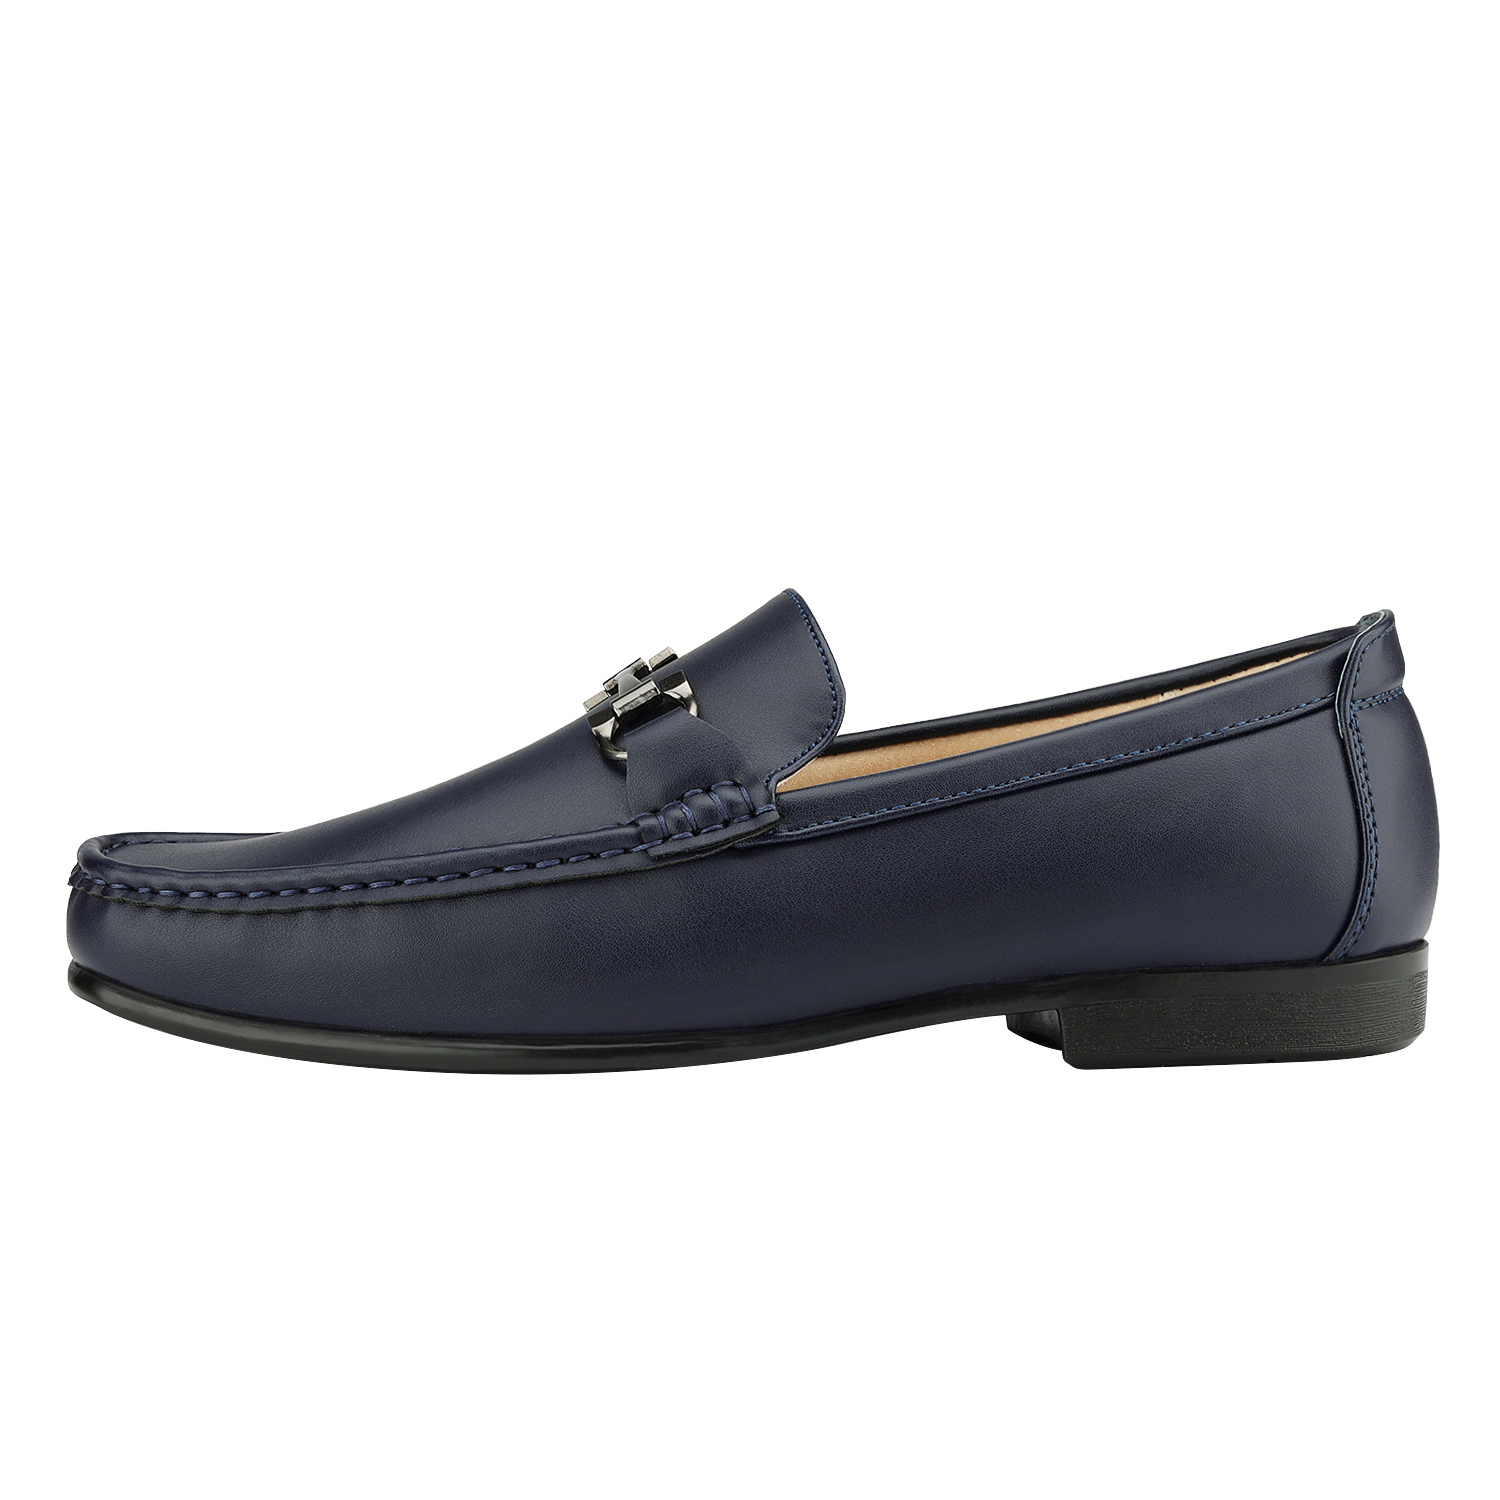 Bruno Marc Men's Moccasin Loafer Shoes Men Dress Loafers Slip On Casual Penny Comfort Outdoor Loafers HENRY-1 NAVY Size 12 - image 4 of 5